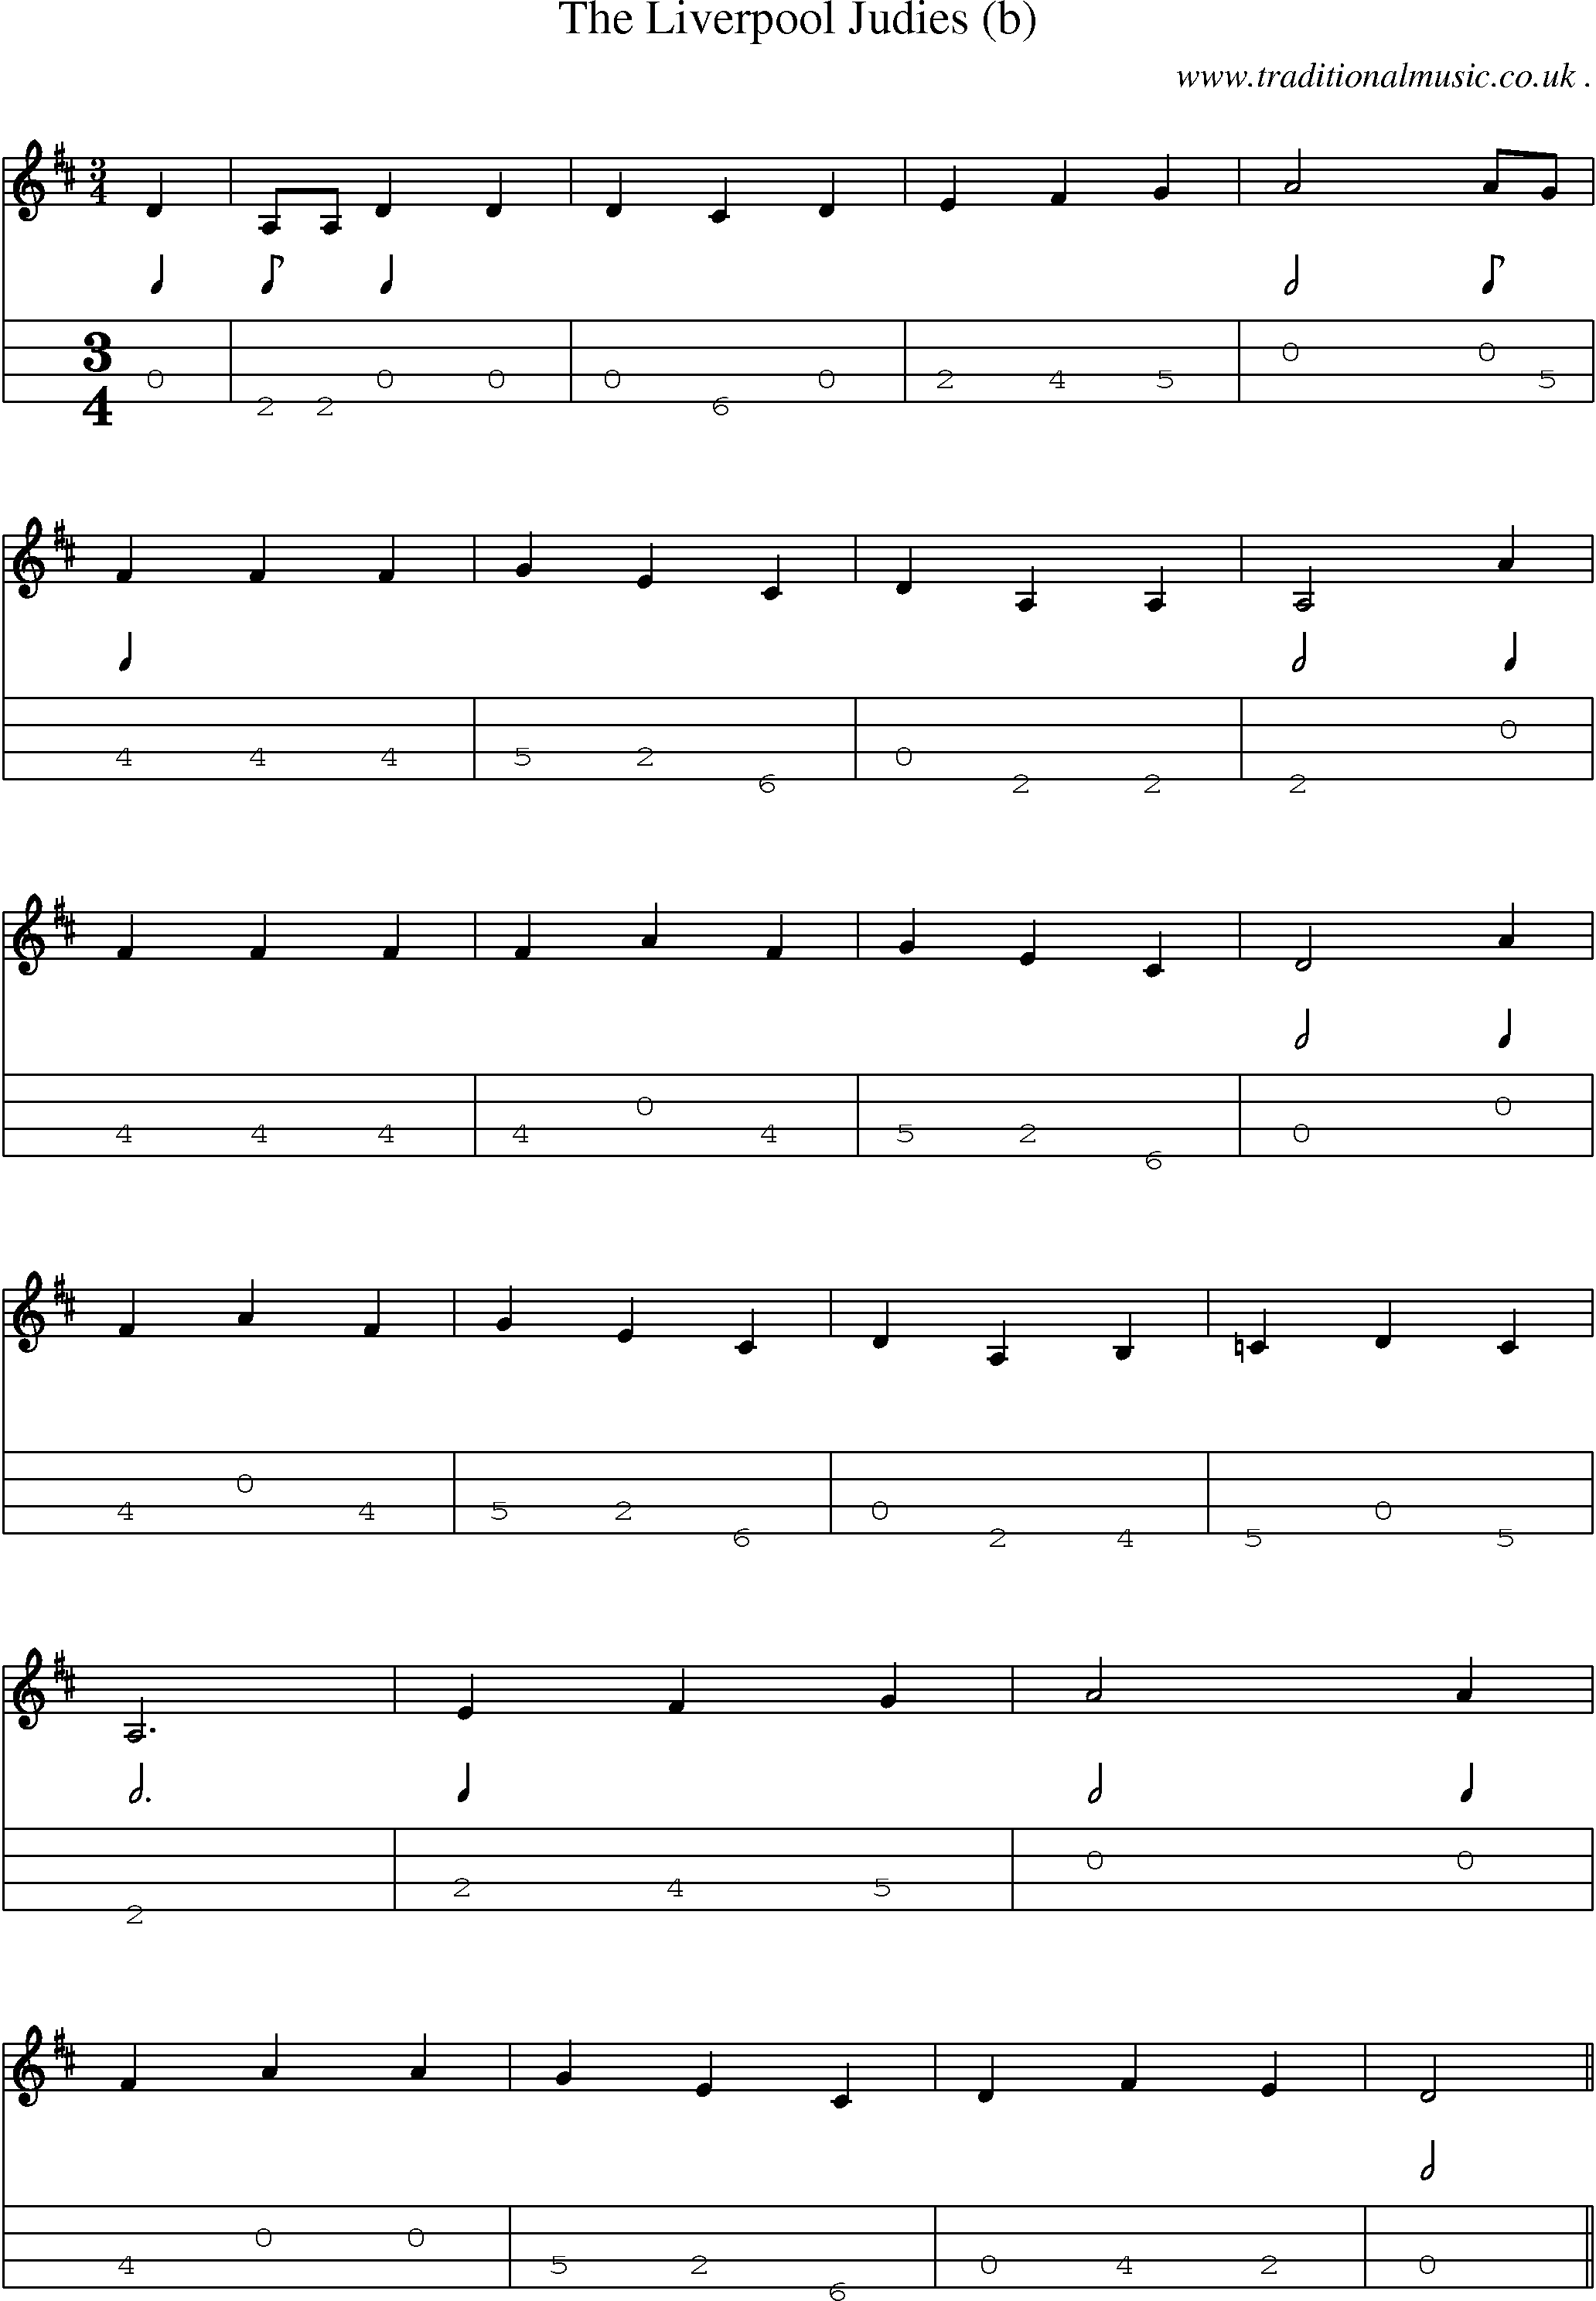 Sheet-Music and Mandolin Tabs for The Liverpool Judies (b)